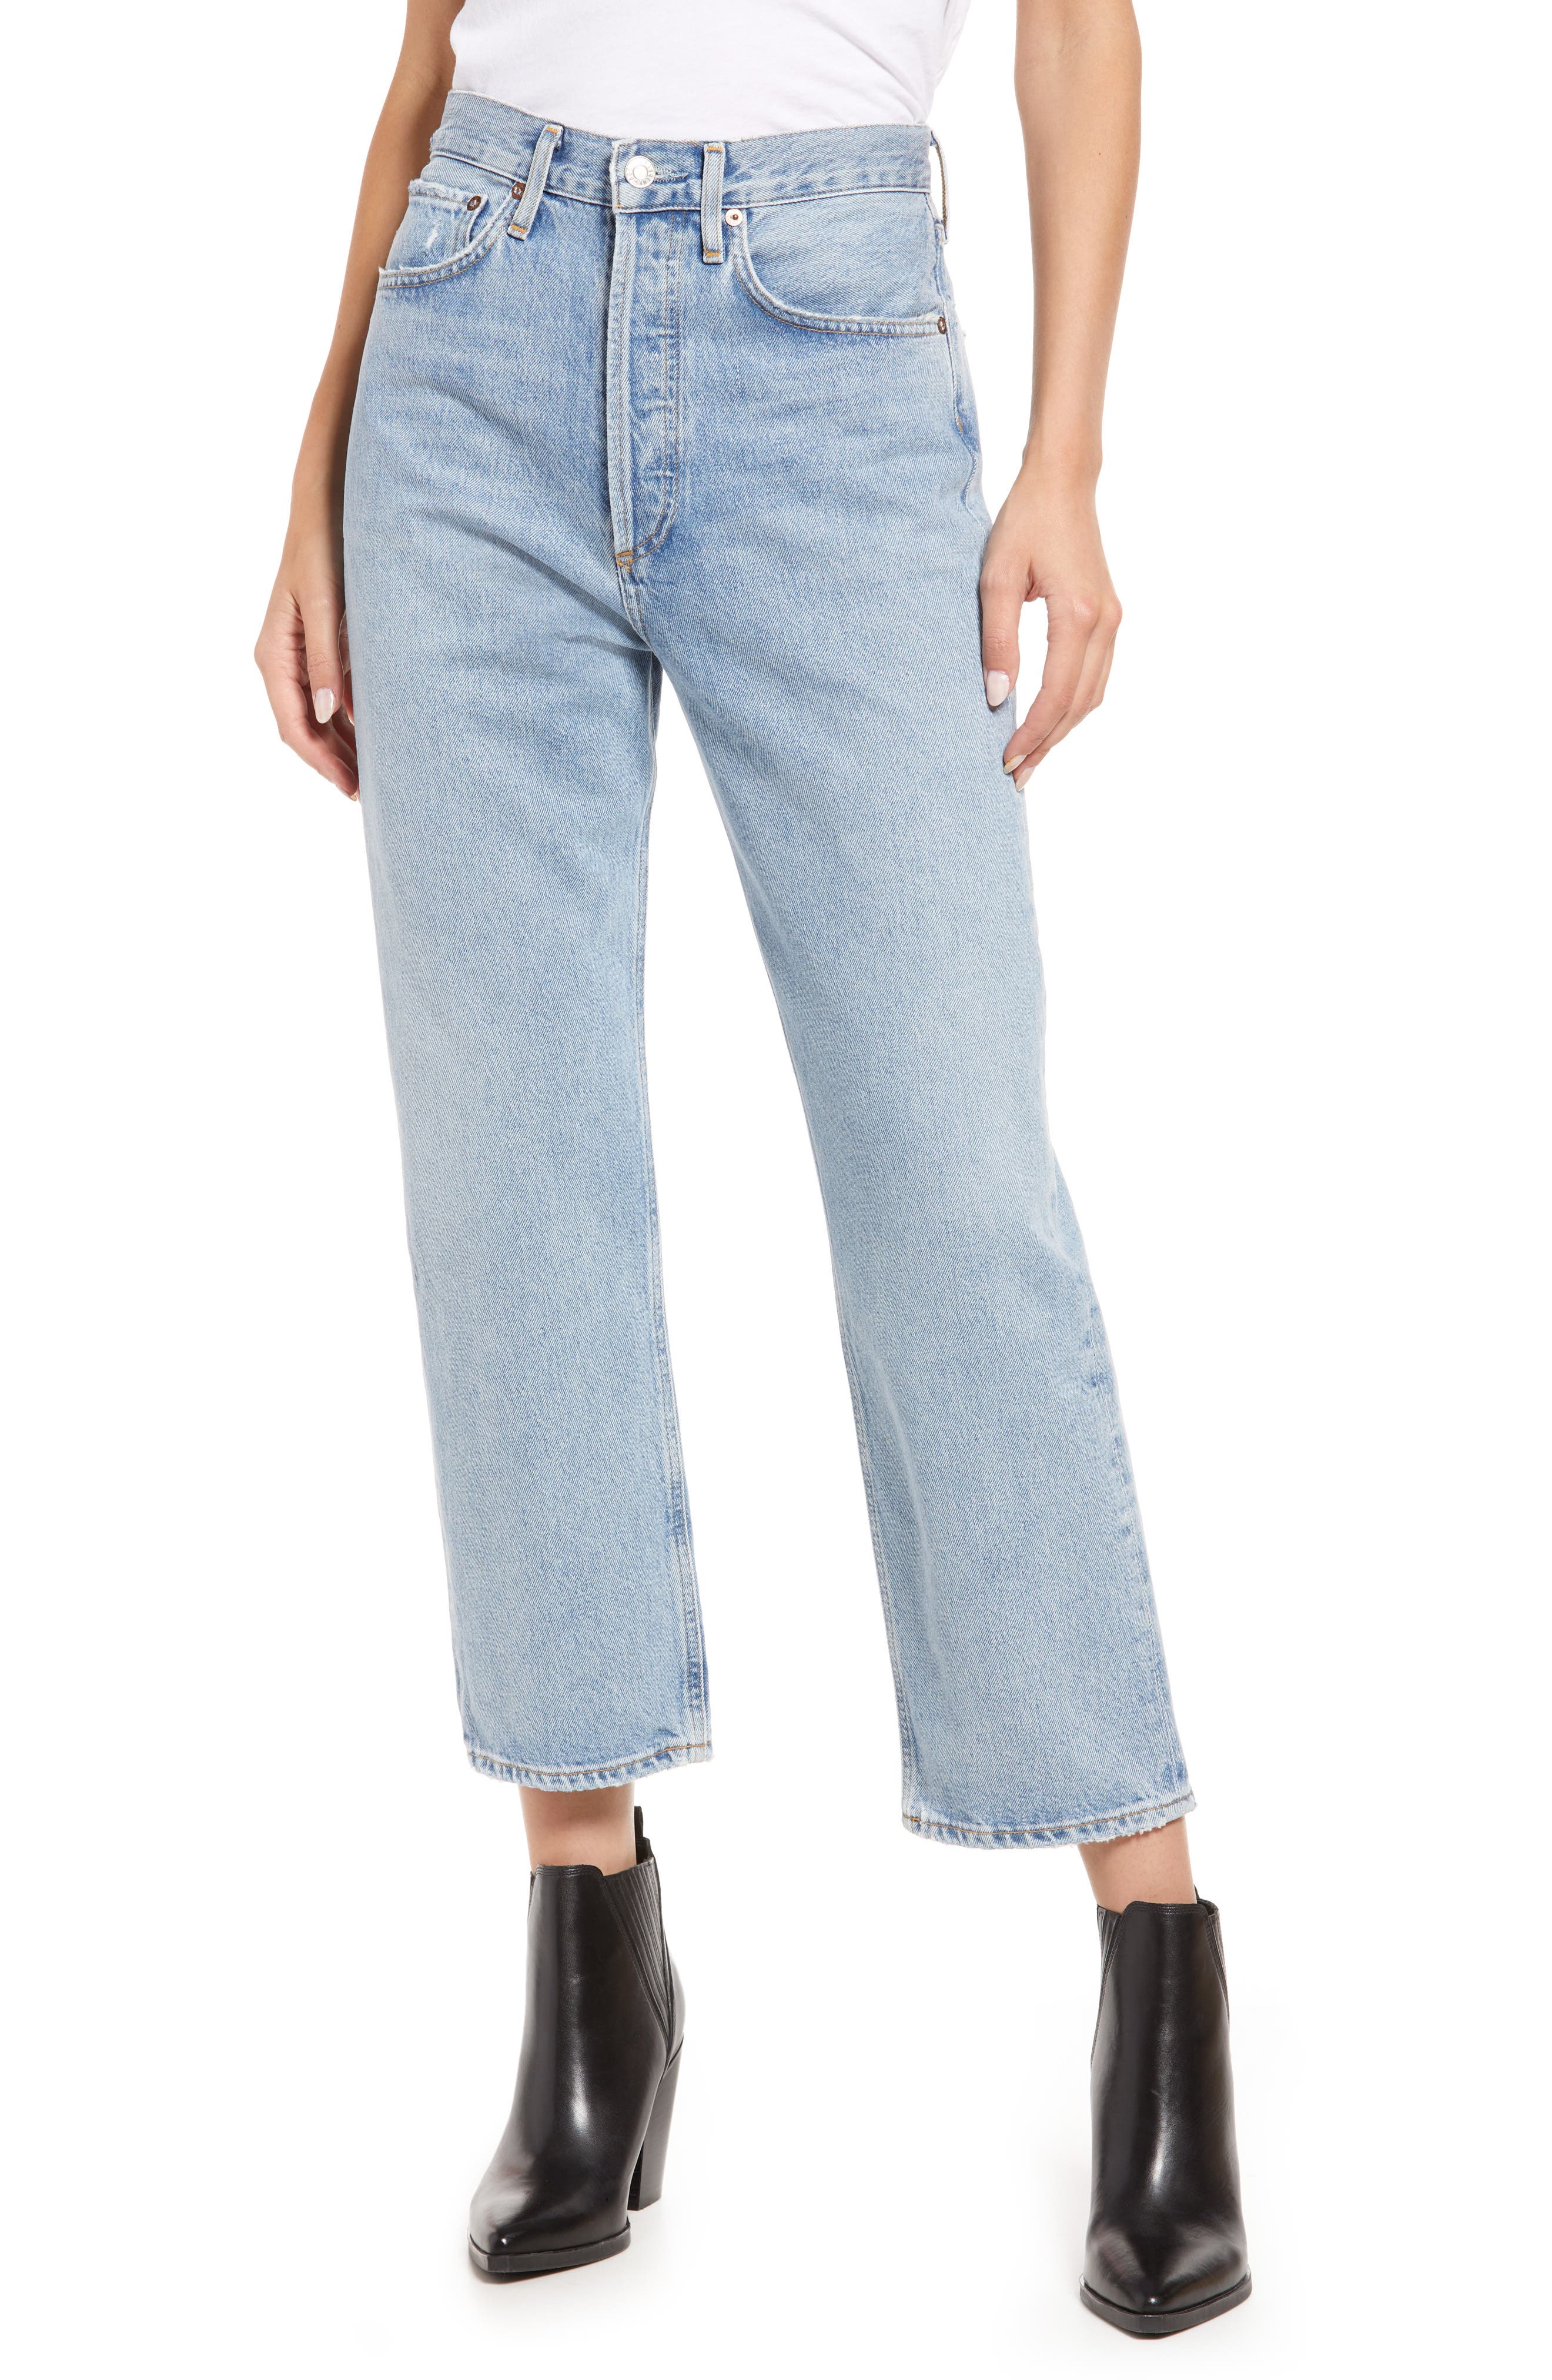 AGOLDE Women's '90s Crop Loose Fit Organic Cotton Jeans in Replica Clean at Nordstrom, Size 32